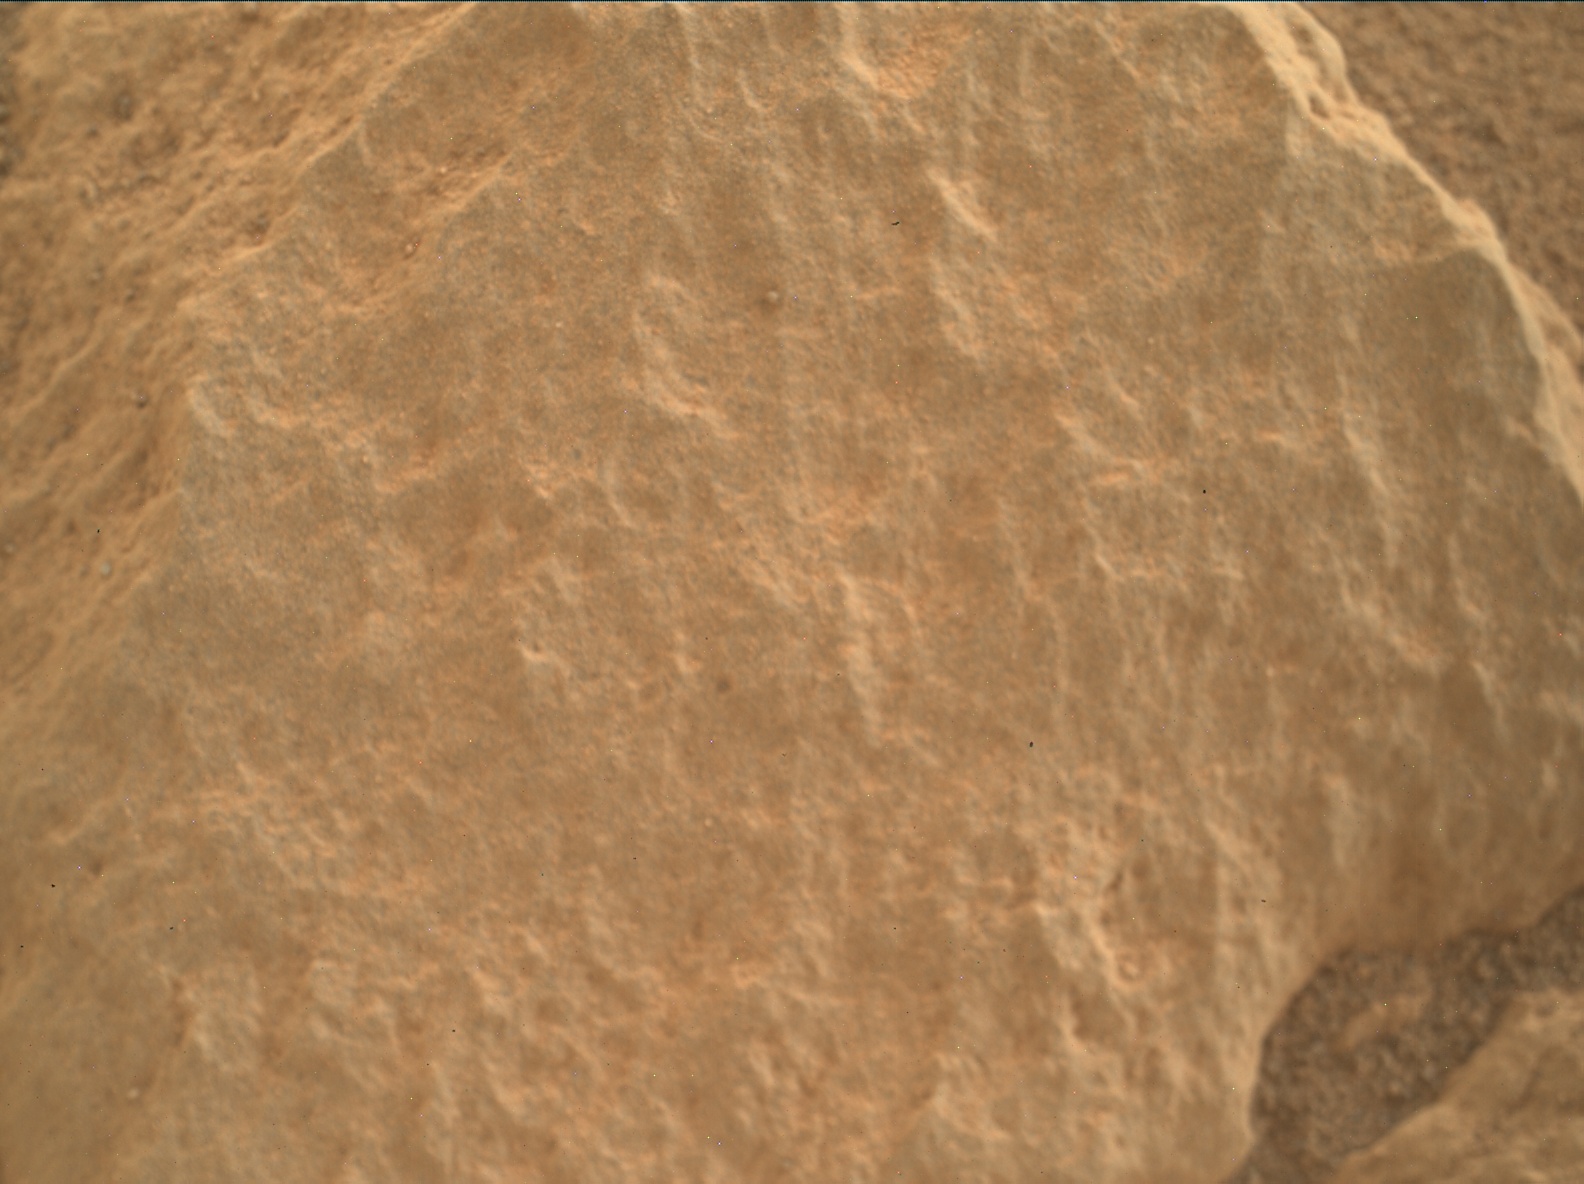 Nasa's Mars rover Curiosity acquired this image using its Mars Hand Lens Imager (MAHLI) on Sol 3423